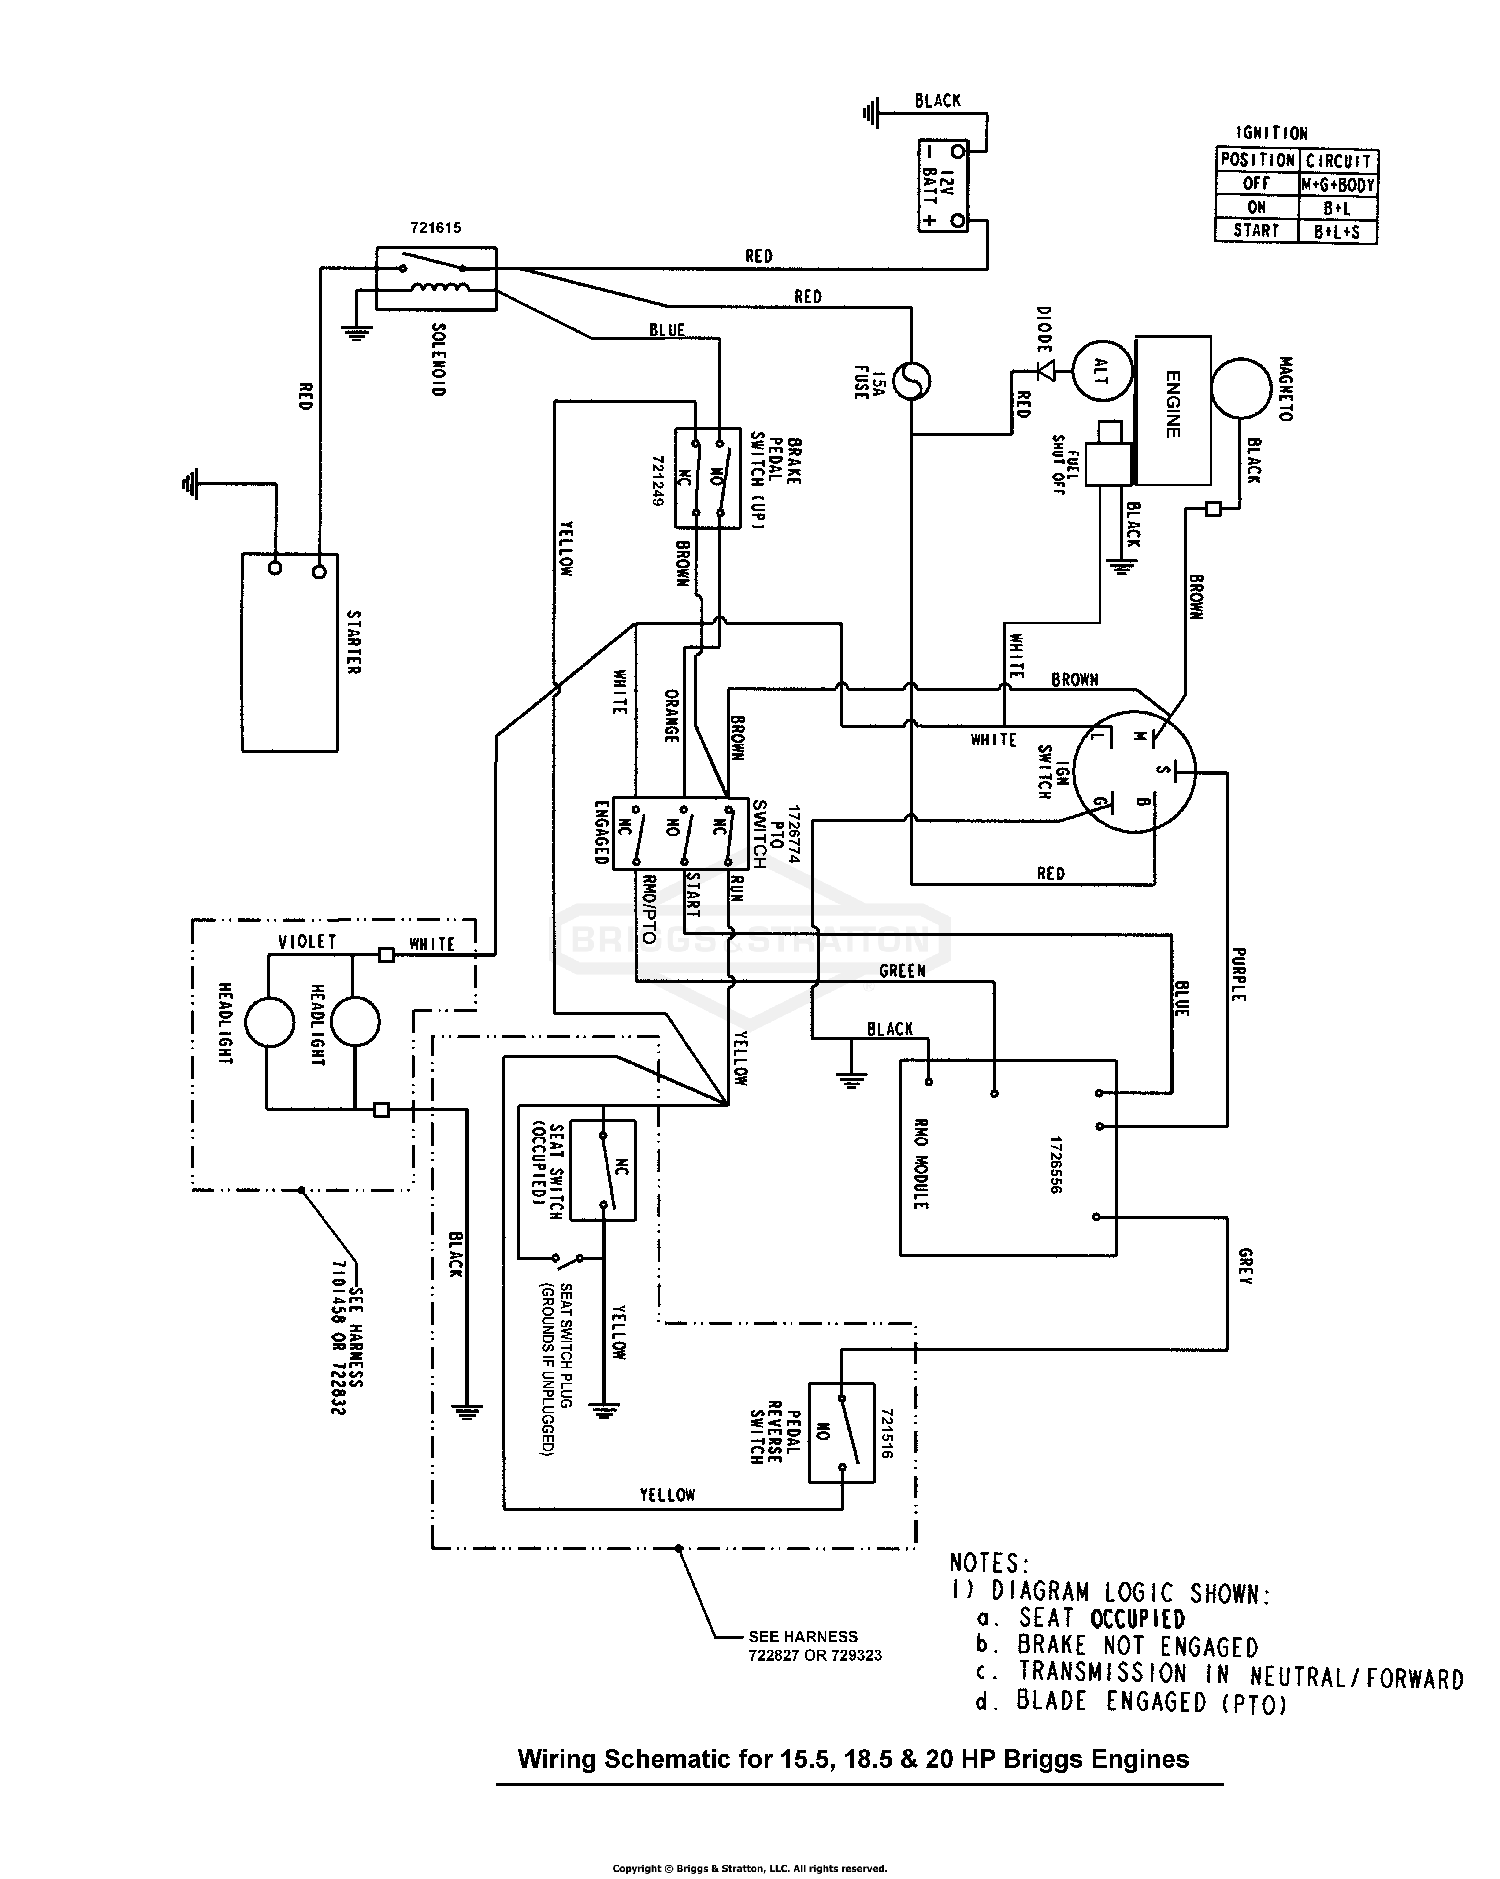 Gear Drive Murray Lawn Tractor, Murray Lawn Tractor Wiring Diagram